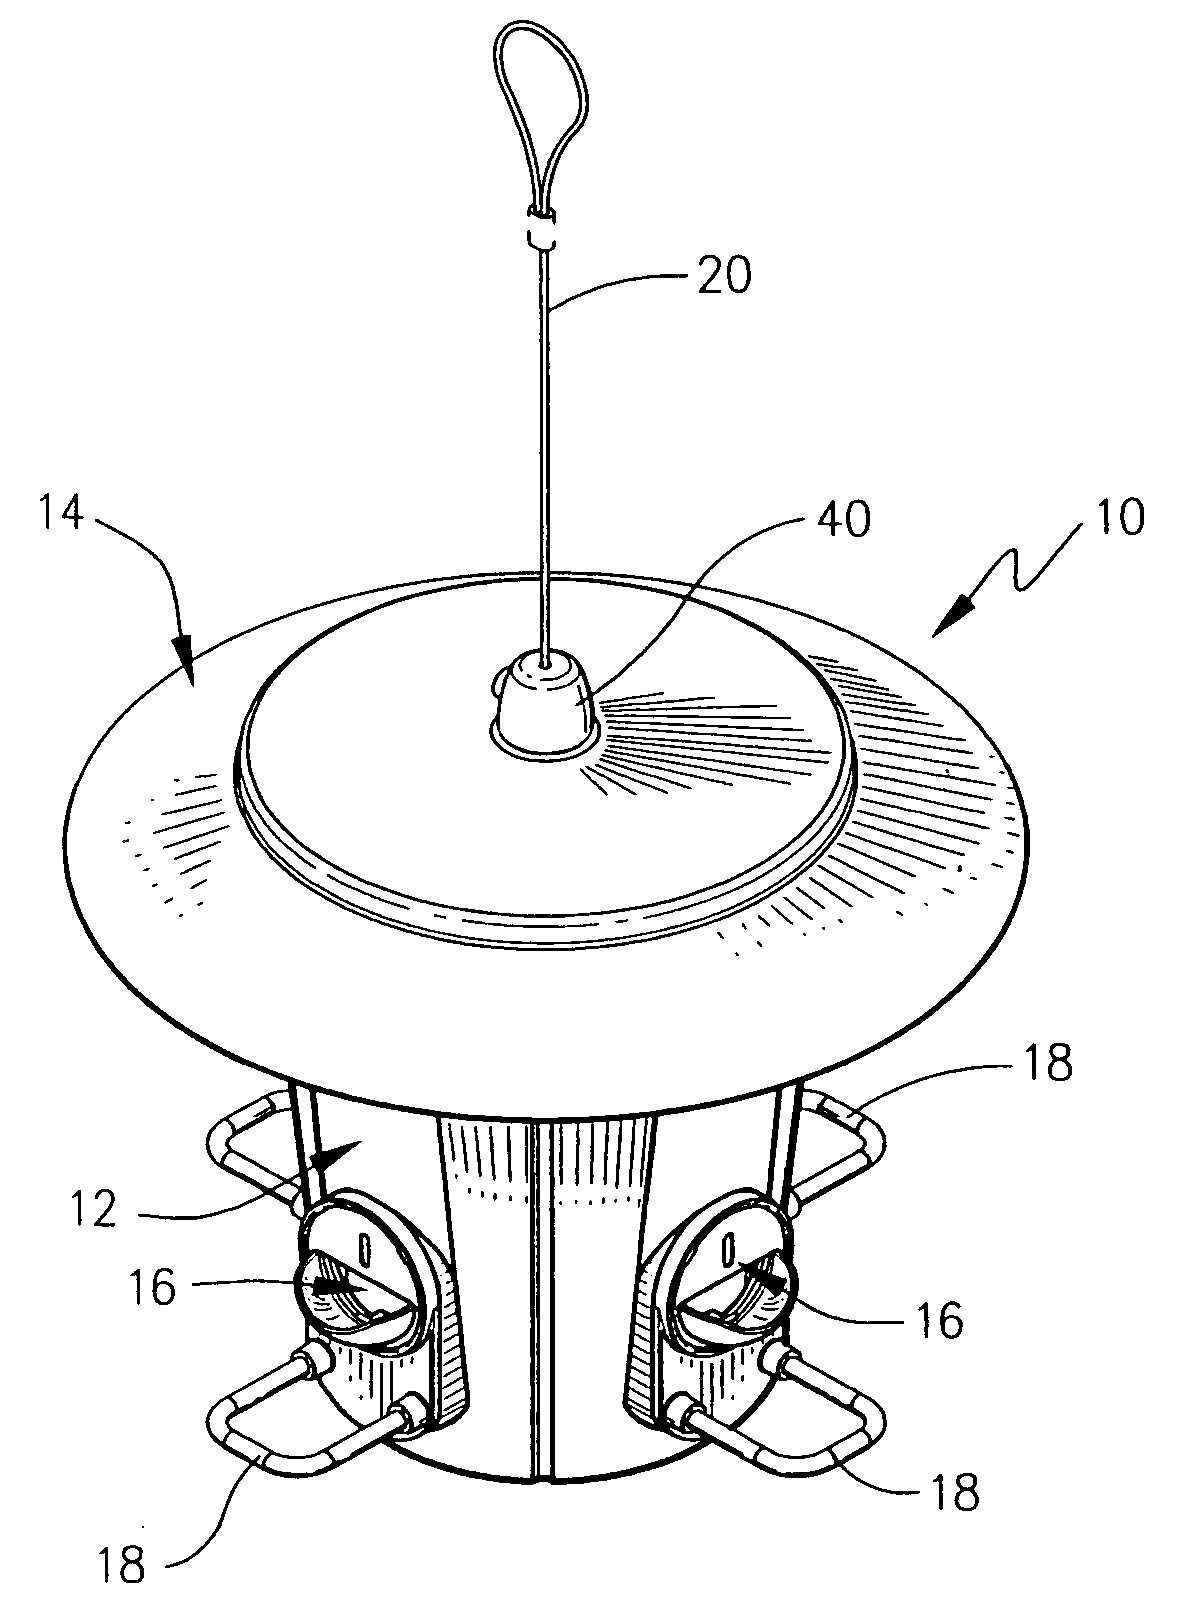 Locking finial and receptacle incorporating the same